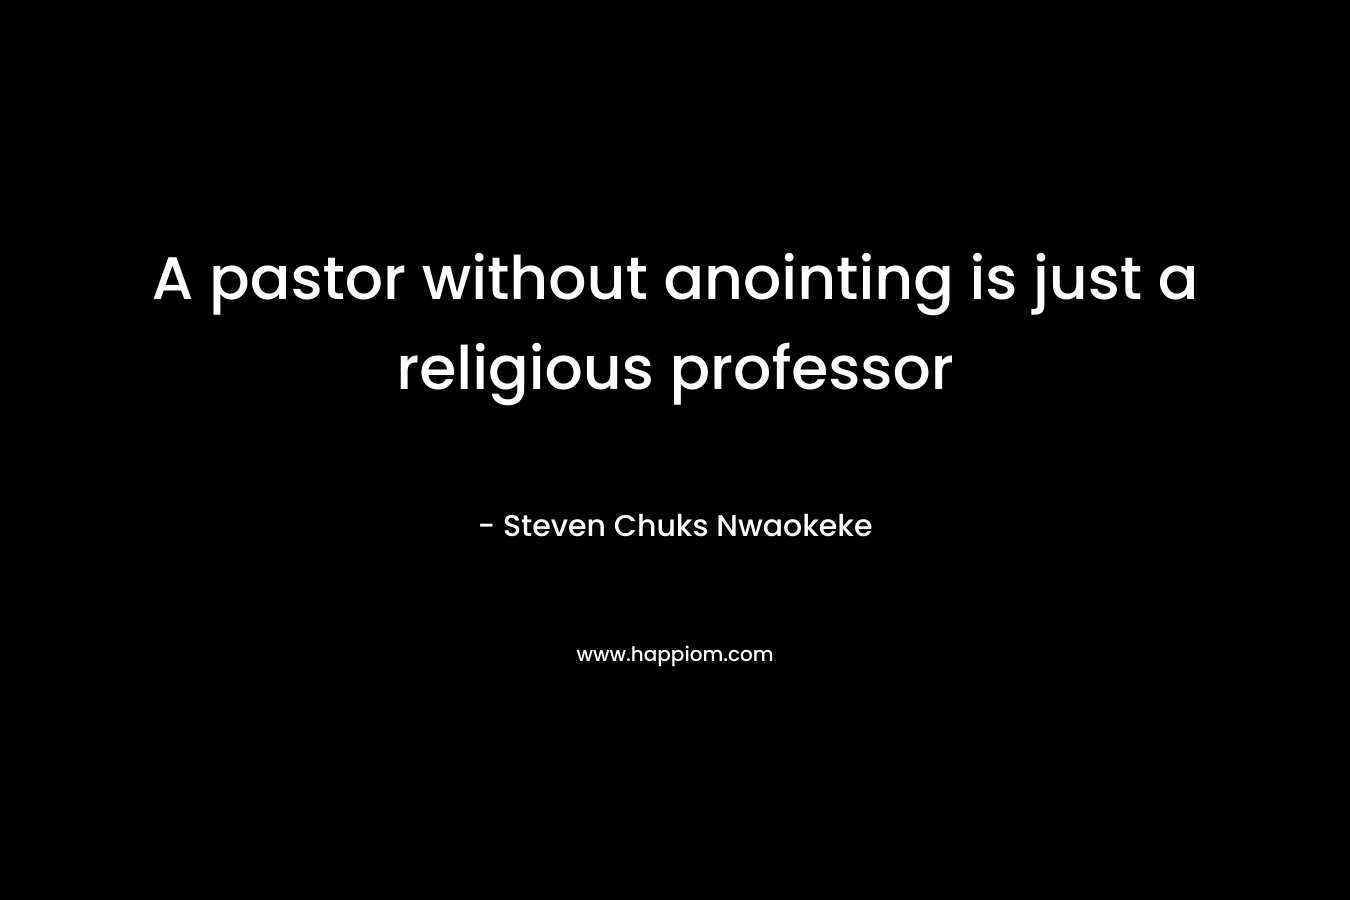 A pastor without anointing is just a religious professor